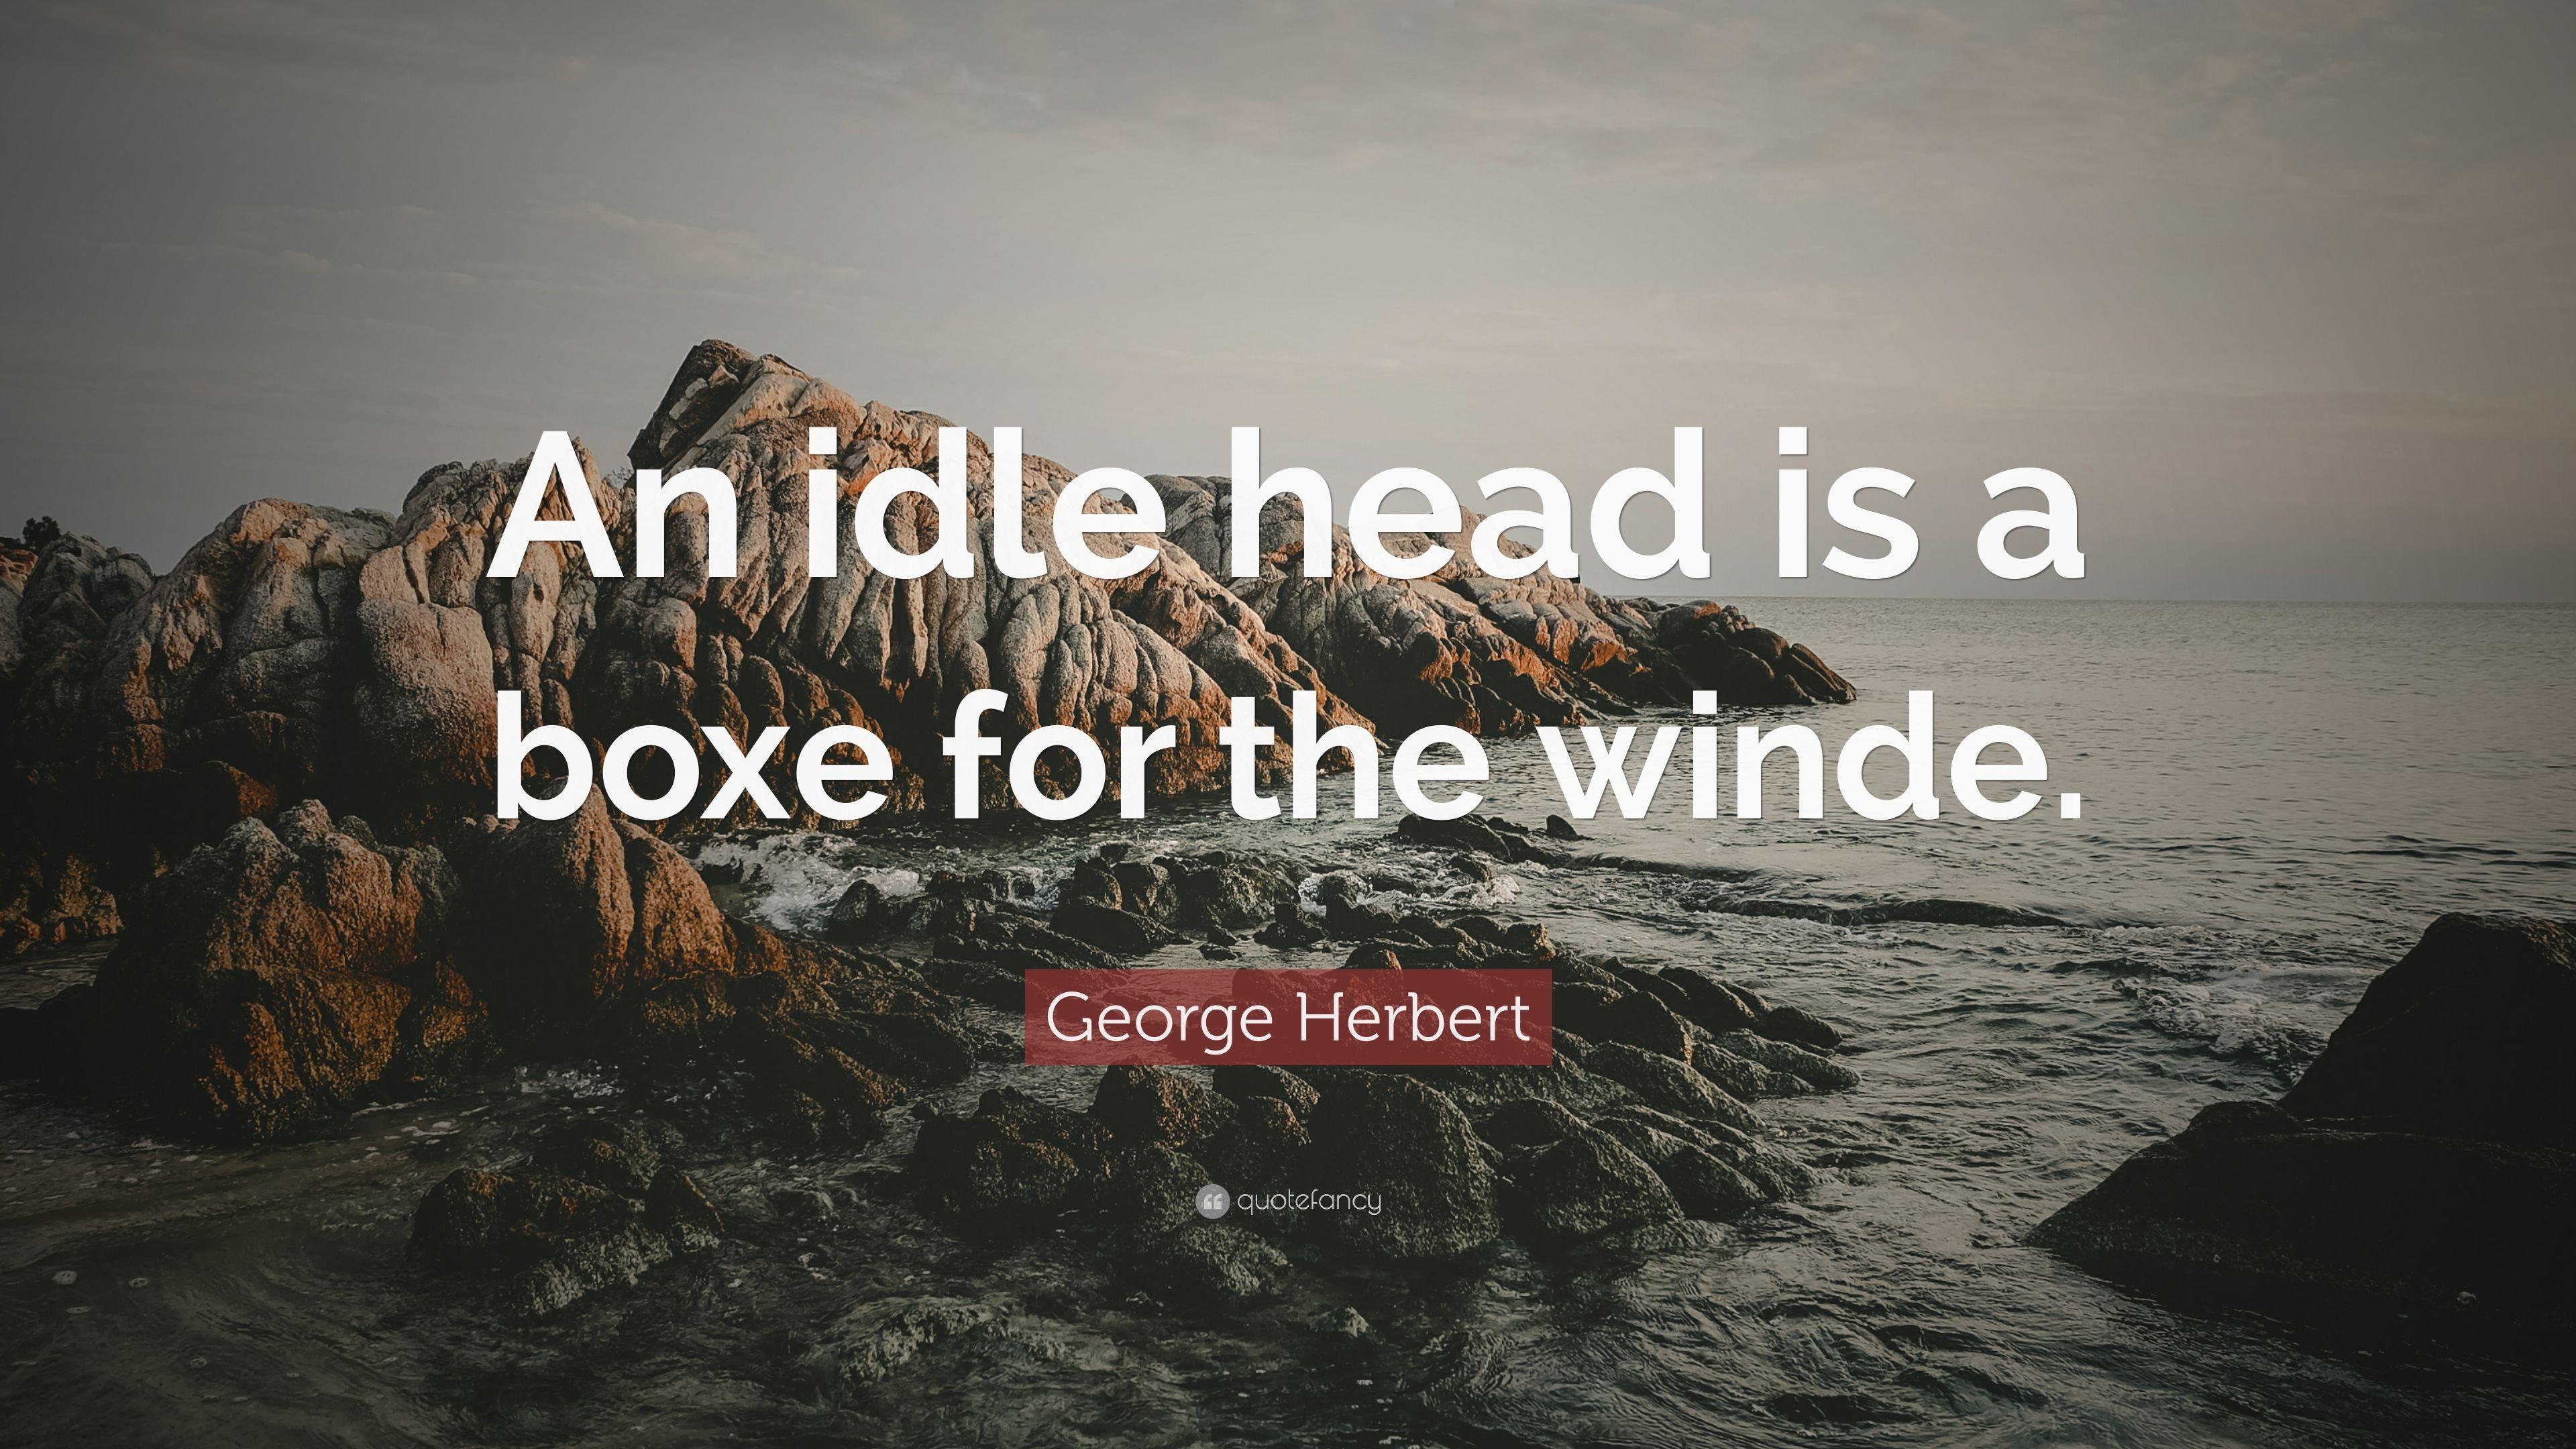 George Herbert Quote: “An idle head is a boxe for the winde.” 7